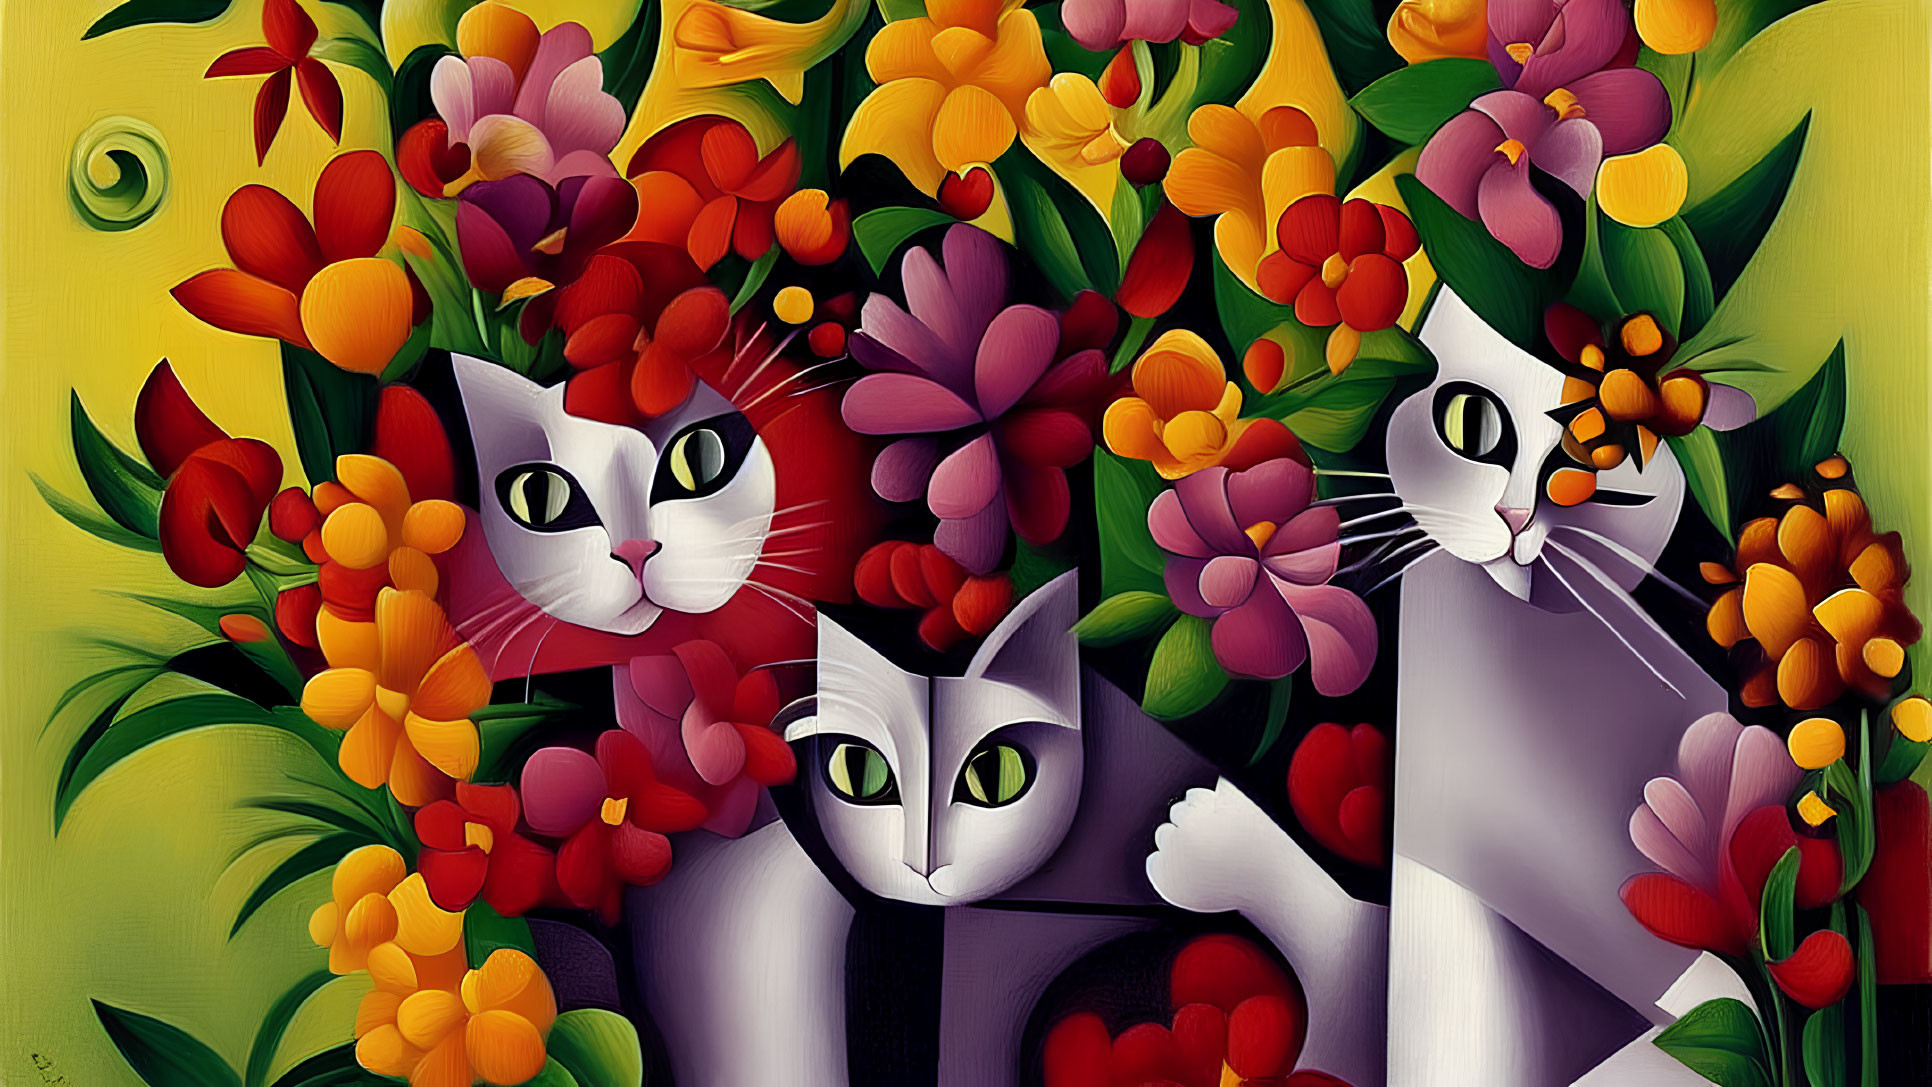 Three stylized cats with expressive eyes in vibrant flowers on yellow background